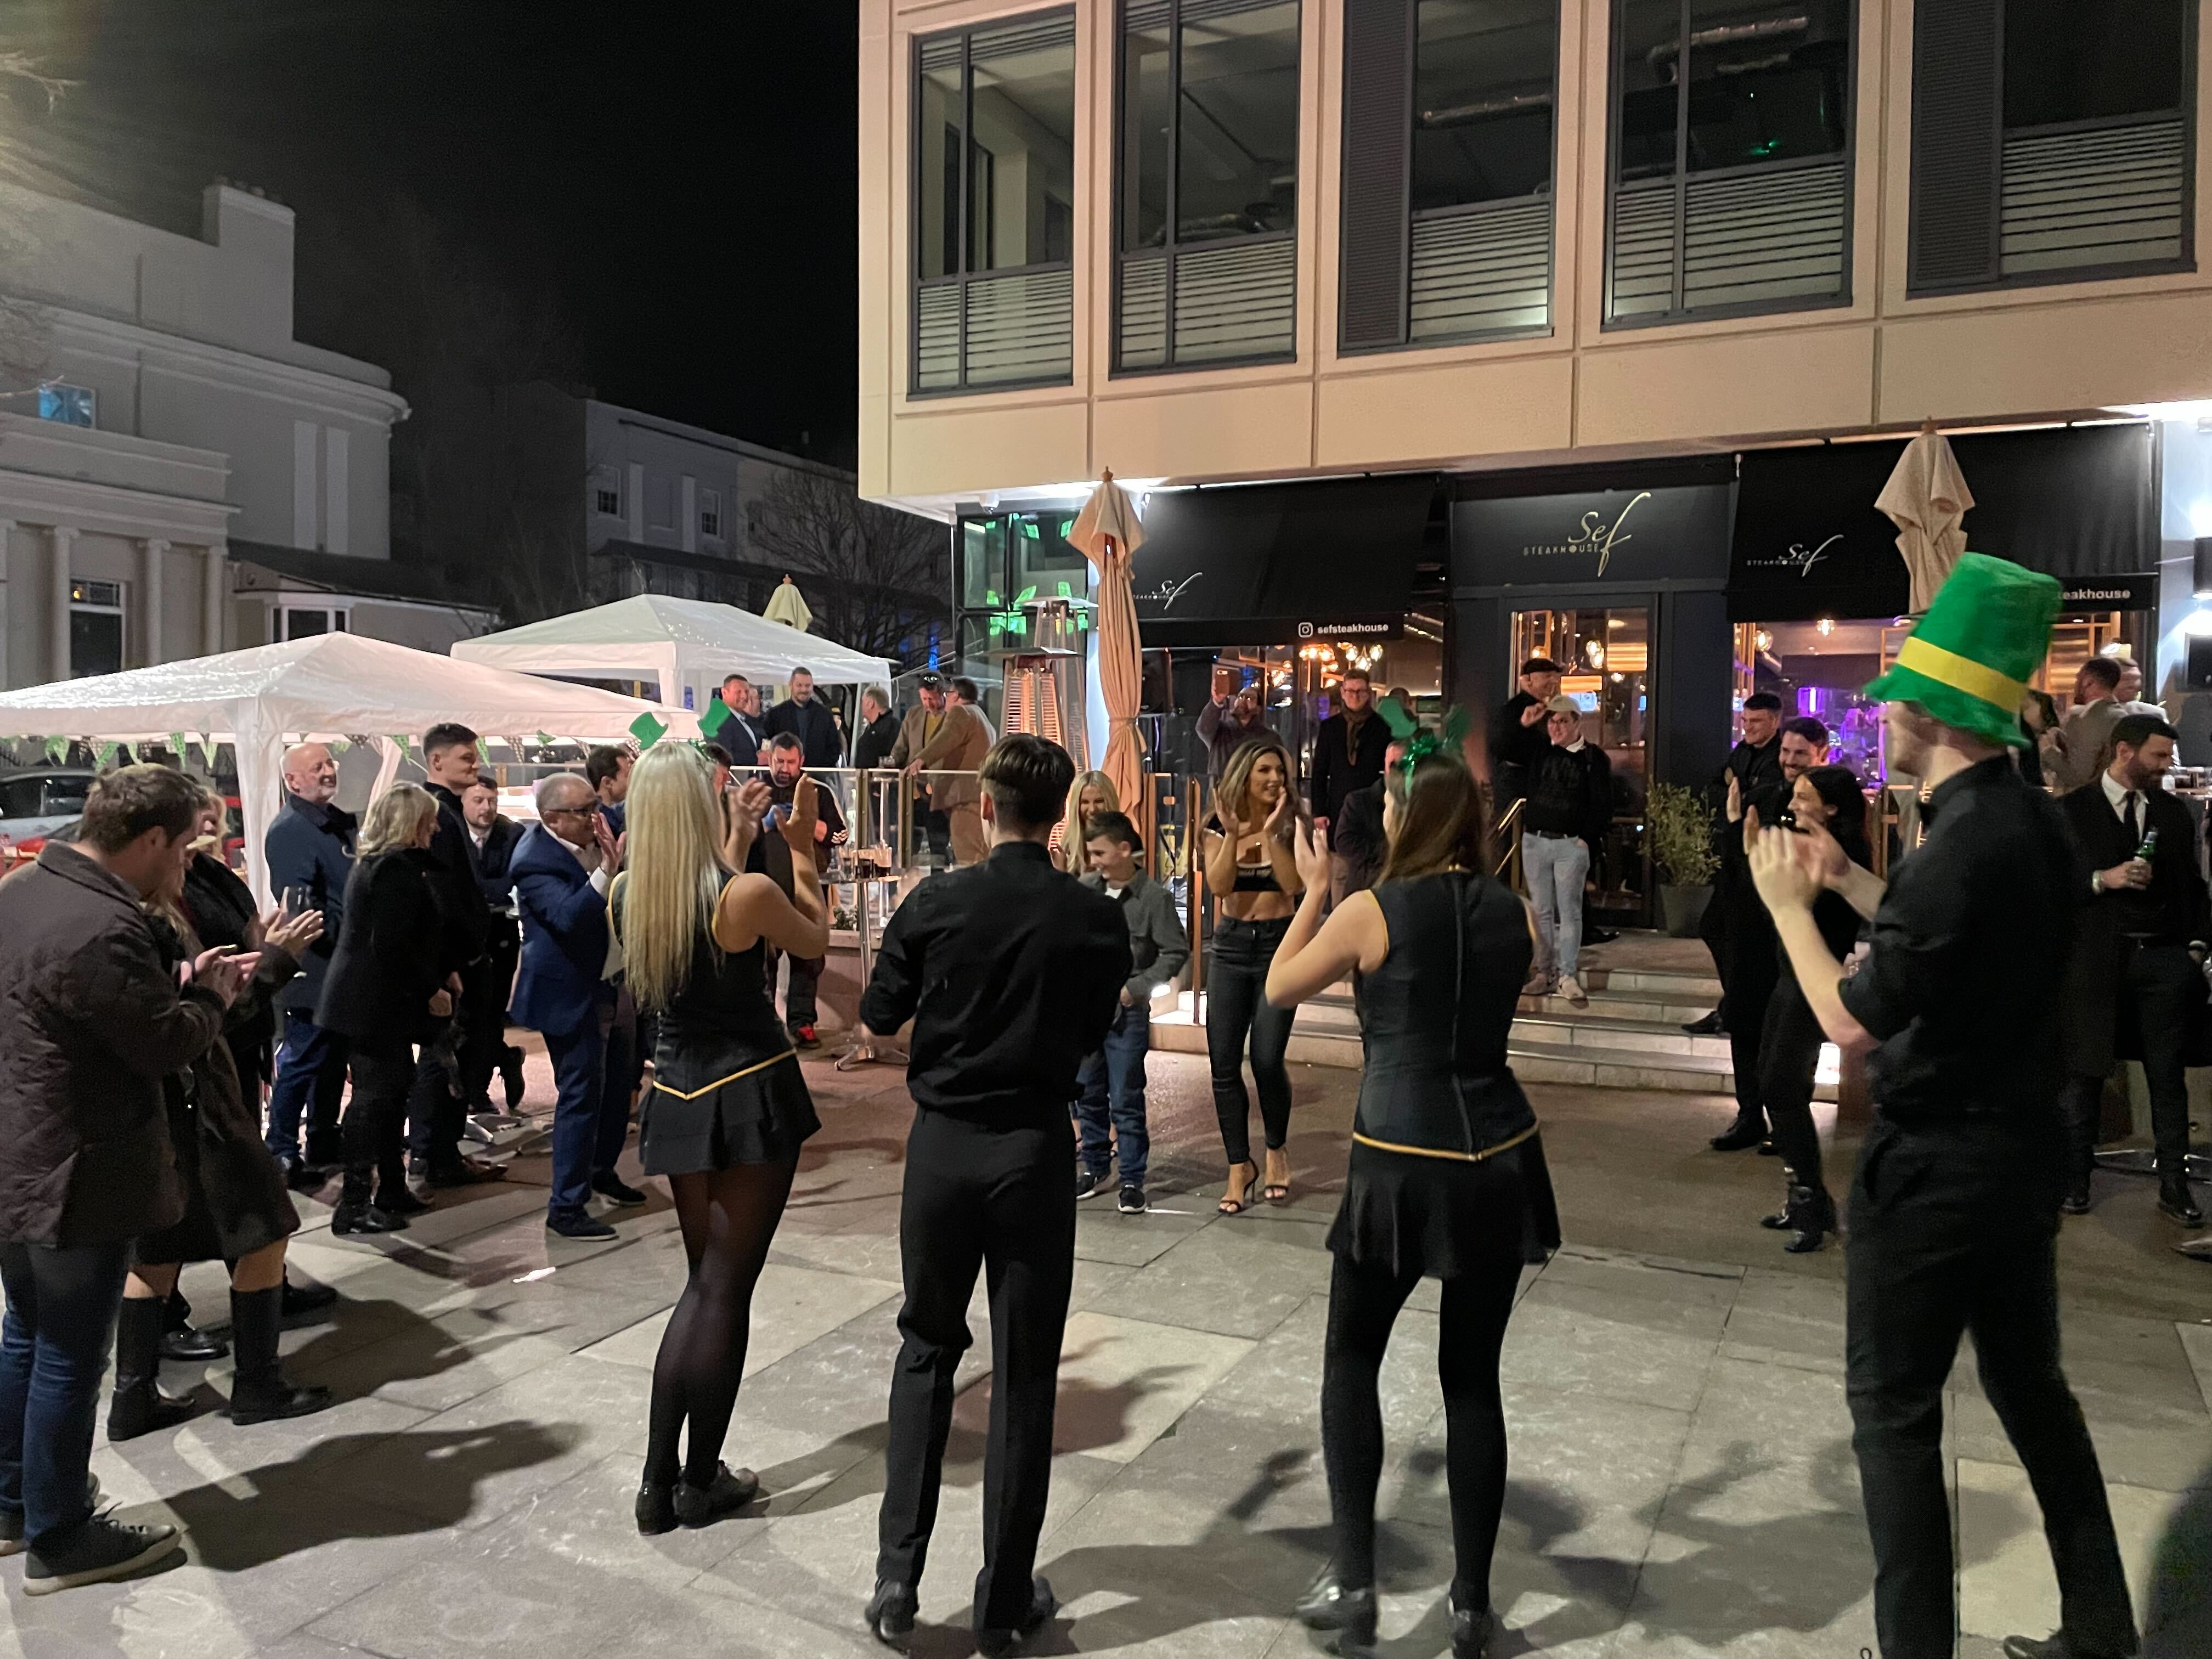 Despite Tuesday night’s arrests, there were no arrests linked to the festival on Wednesday as revellers enjoyed the evening in the town centre